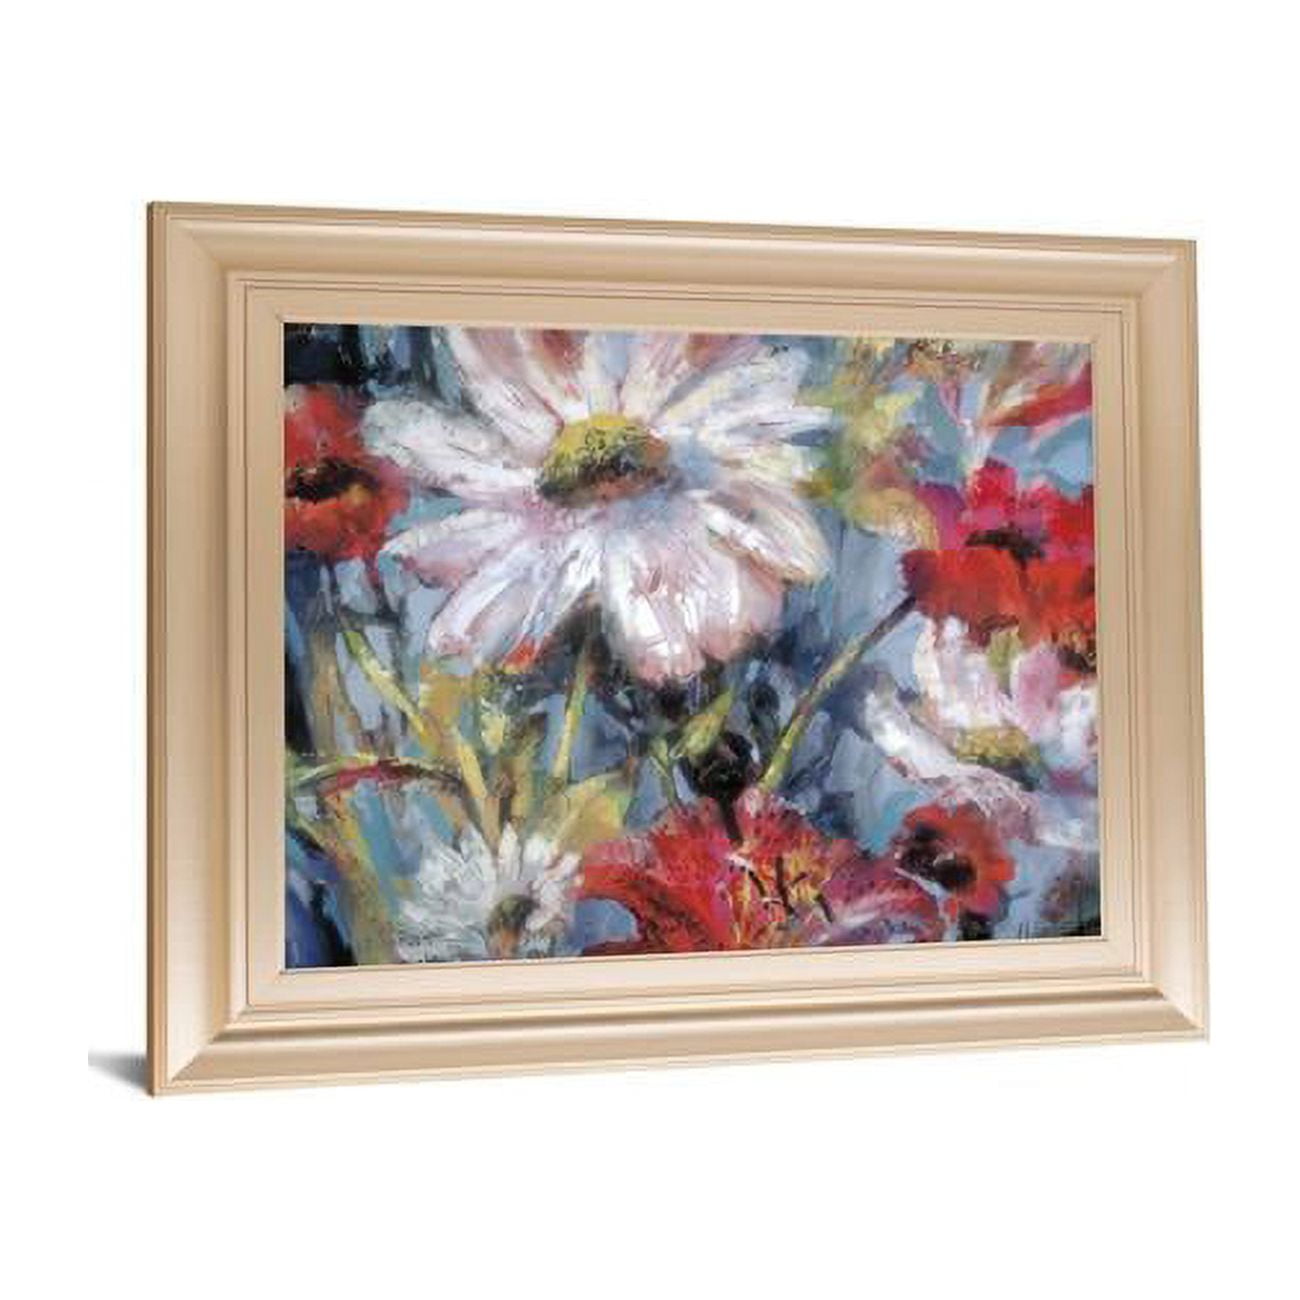 Picture of Classy Art 8291 22 x 26 in. Tangled Garden I by Brent Heighton Framed Print Wall Art